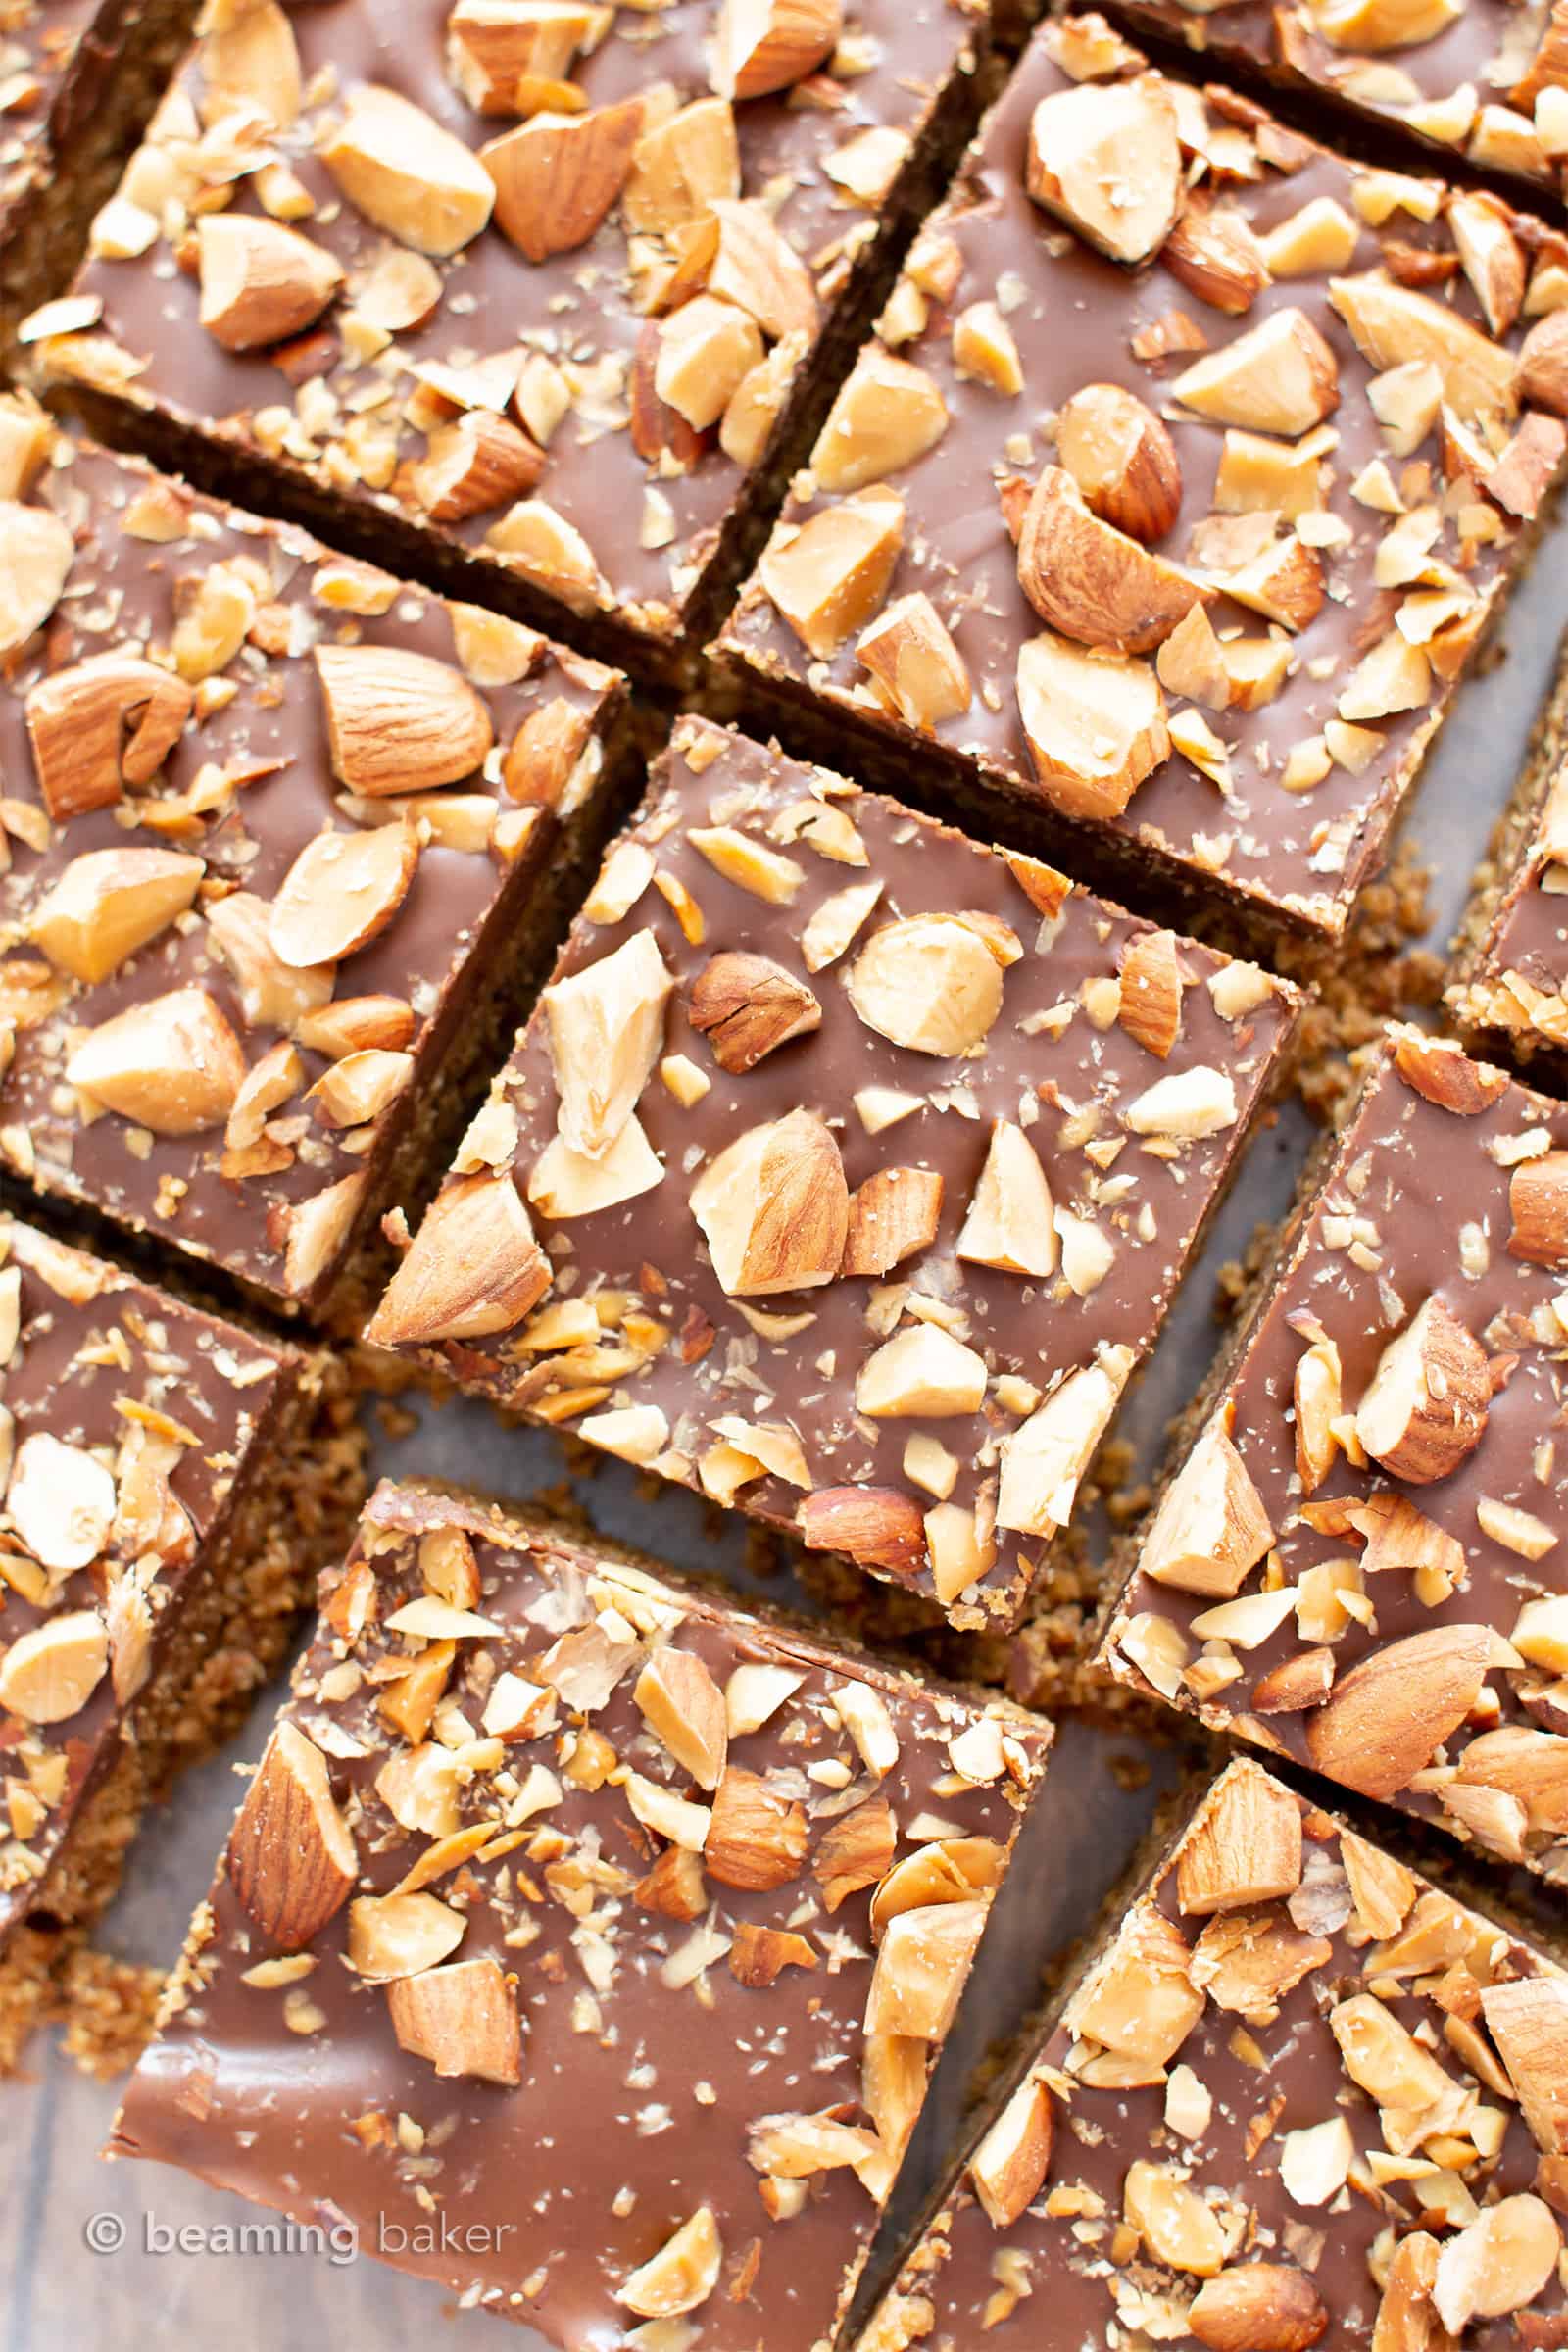 4 Ingredient No Bake Paleo Chocolate Almond Bars (V, GF): this paleo no bake chocolate almond bars recipe is so easy with just 4 ingredients! It’s the best no bake date nut bars recipe – healthy, vegan & gluten-free! #NoBake #Vegan #Paleo #Chocolate | Recipe at BeamingBaker.com